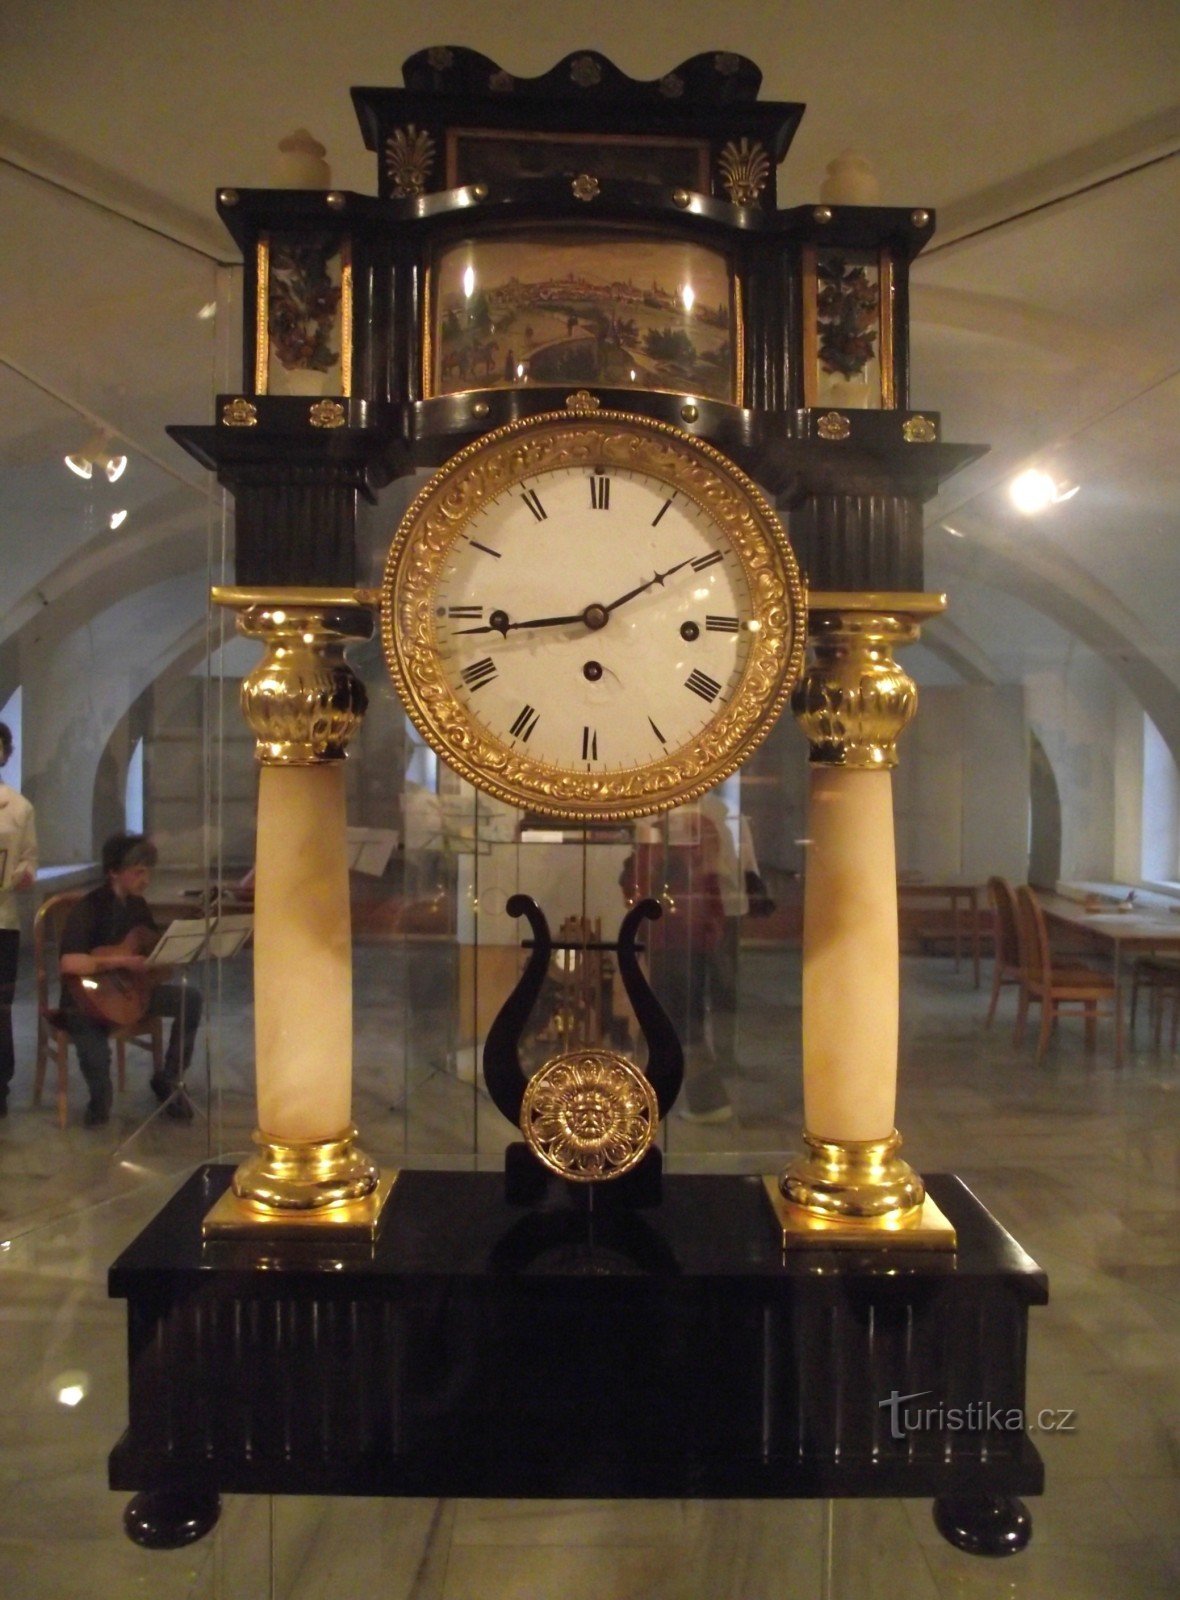 Time cannot be stopped... (Muzeum Šumperk)